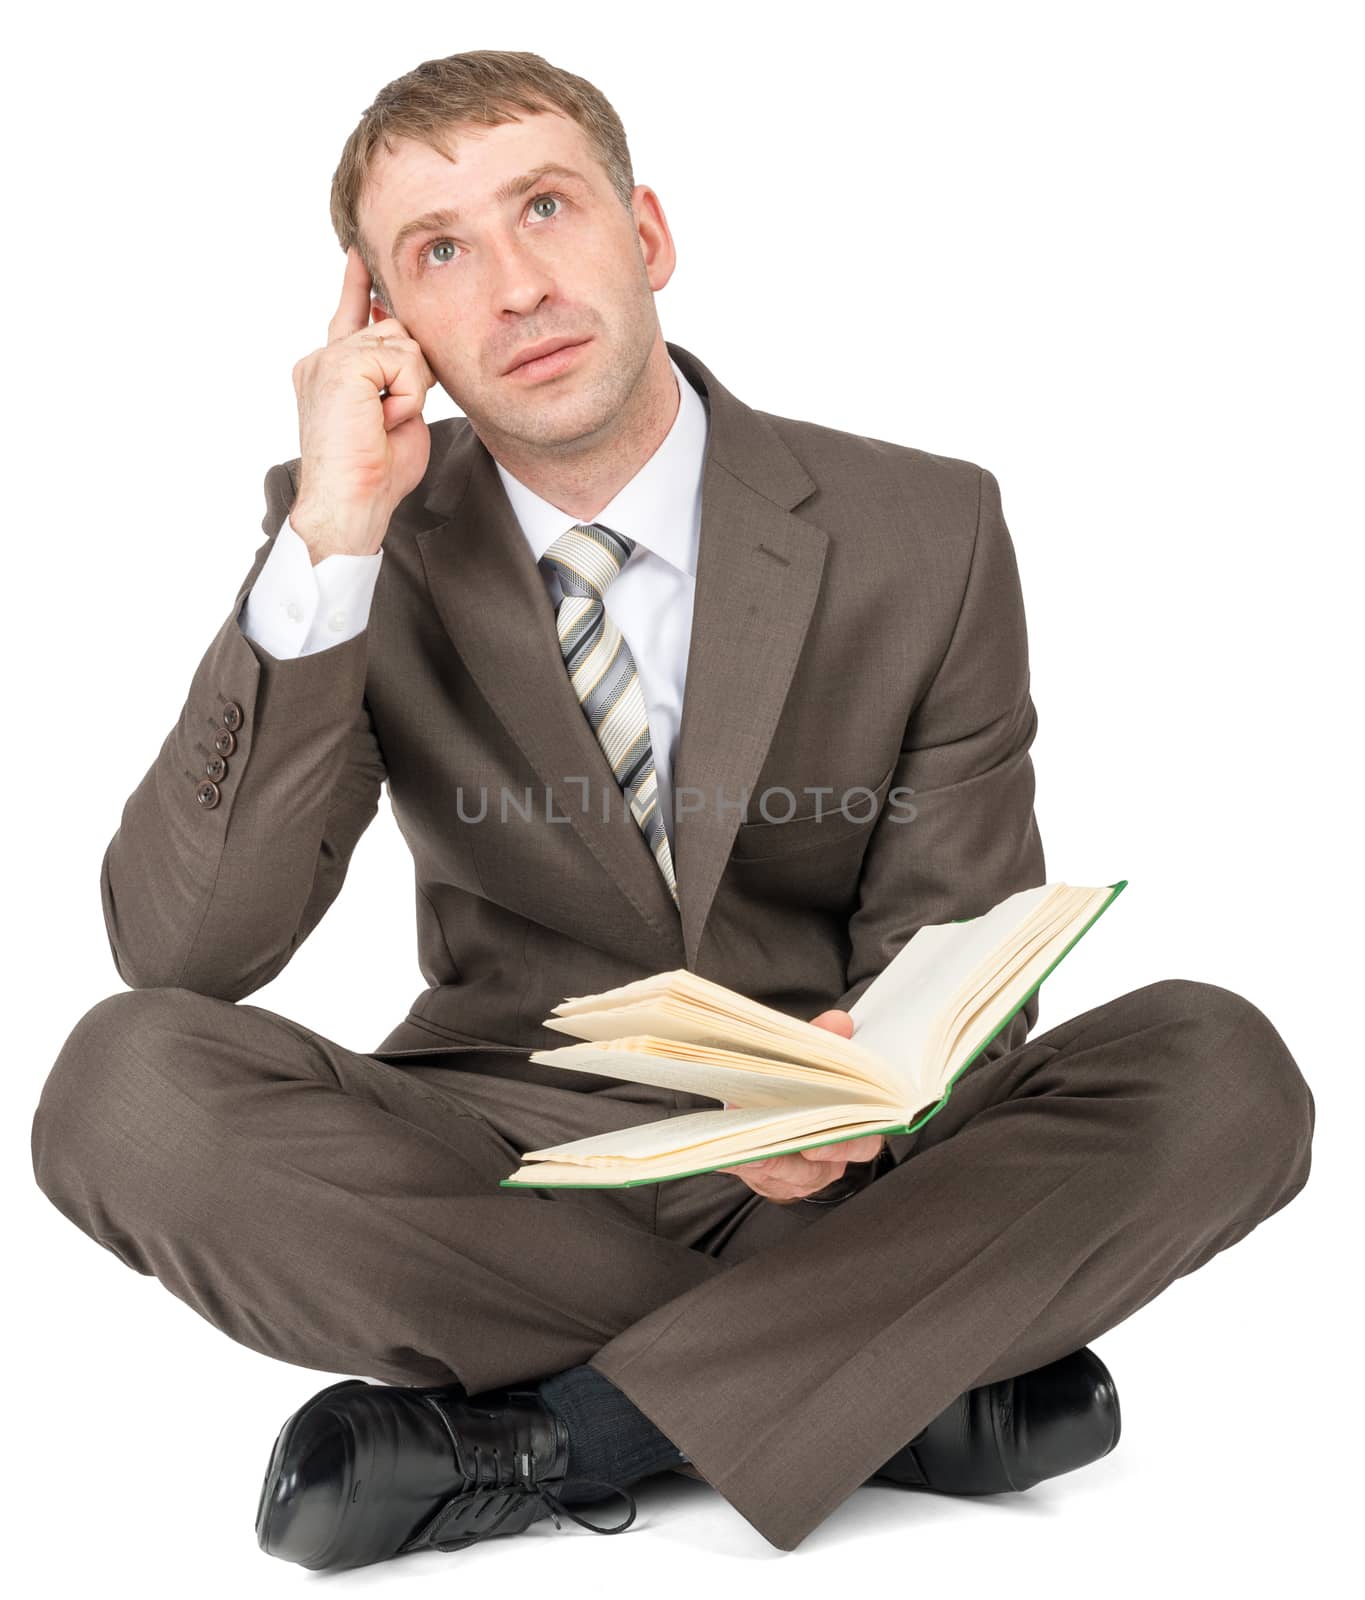 Man sitting with book and thinking isolated on white background